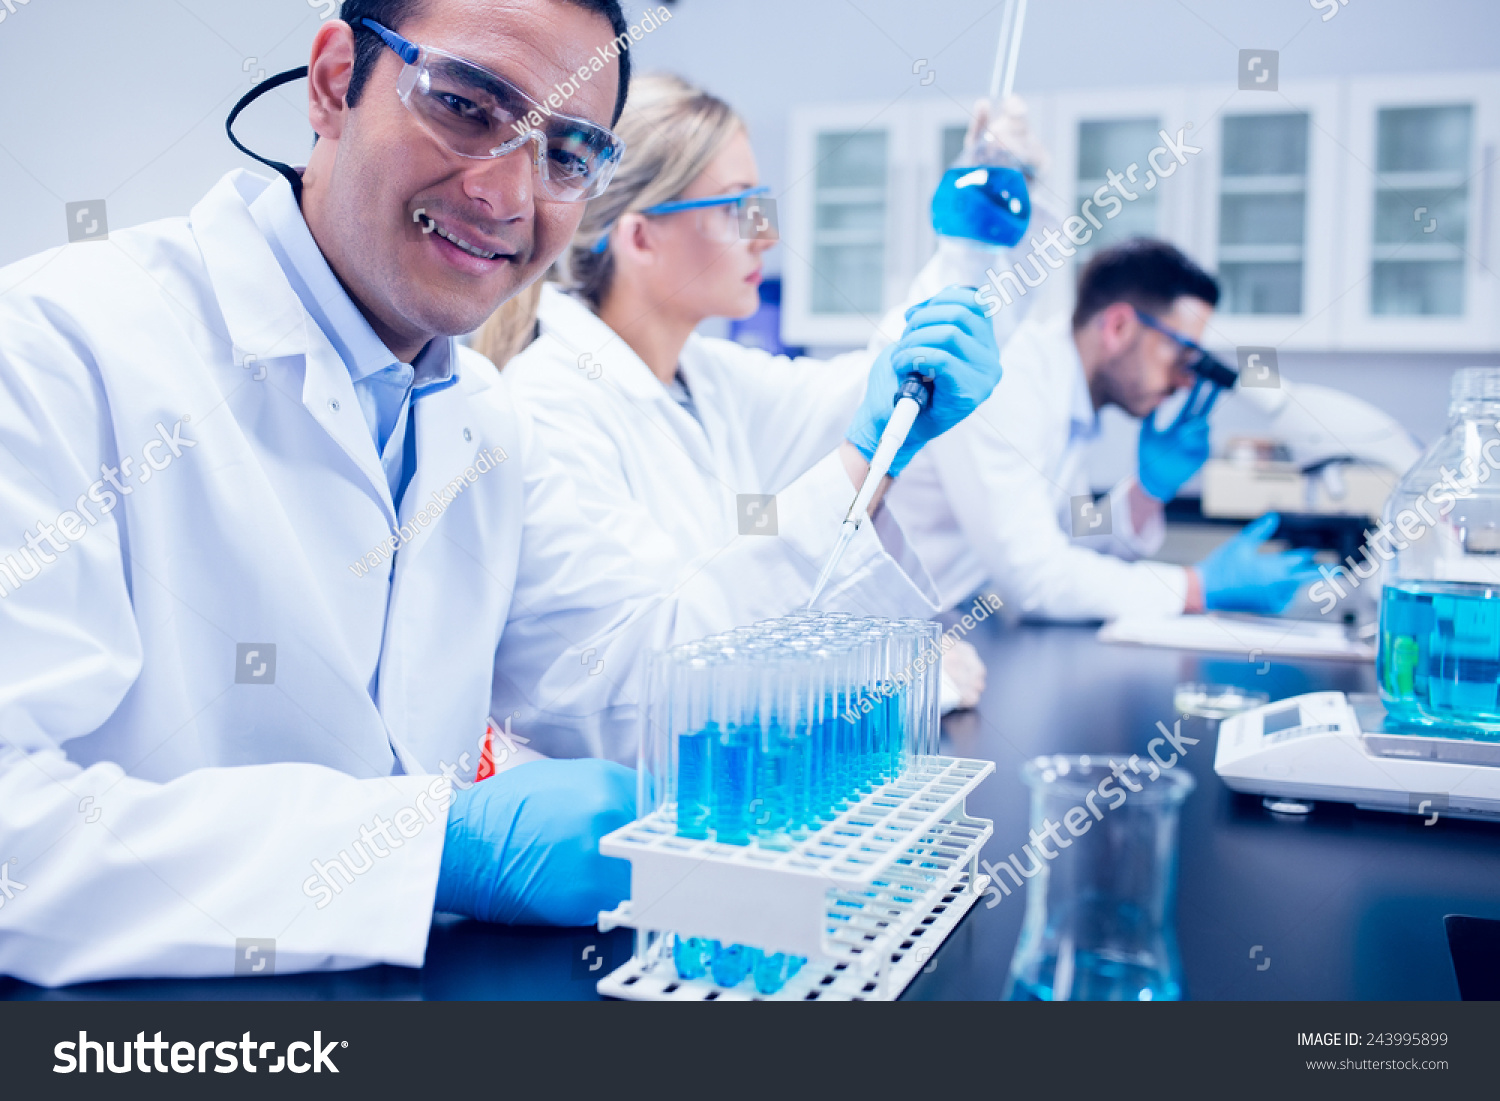 Science student using pipette in the lab to fill test tubes at the university #243995899